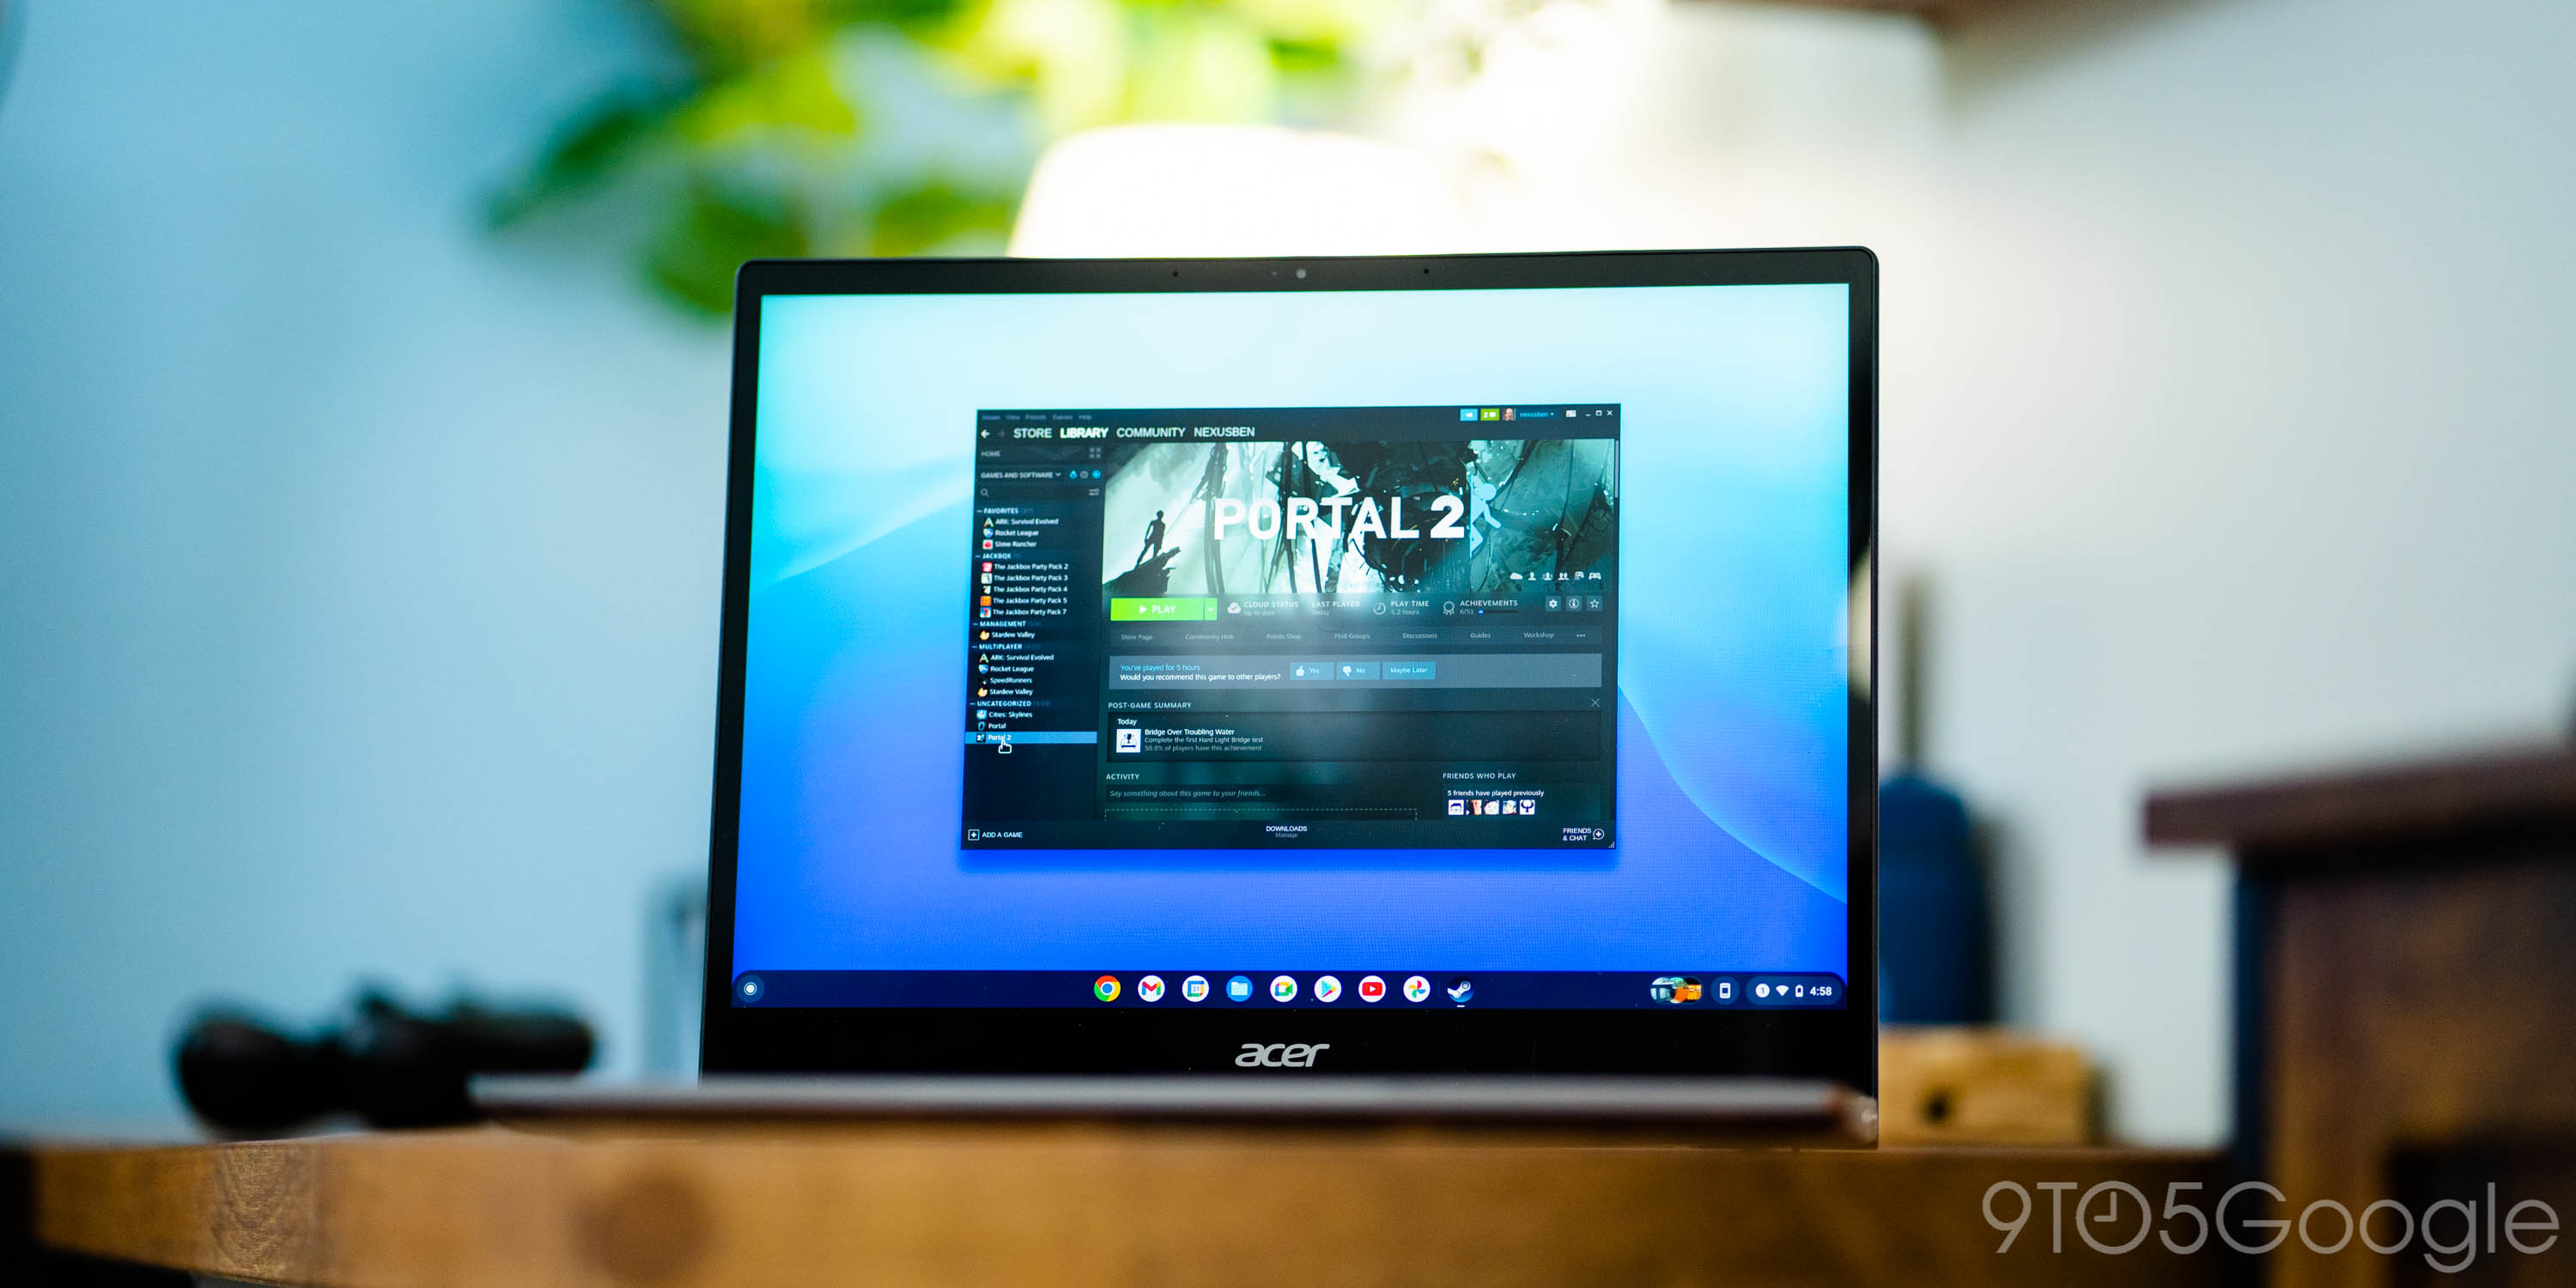 How To Download The Epic Games Launcher On Chromebook